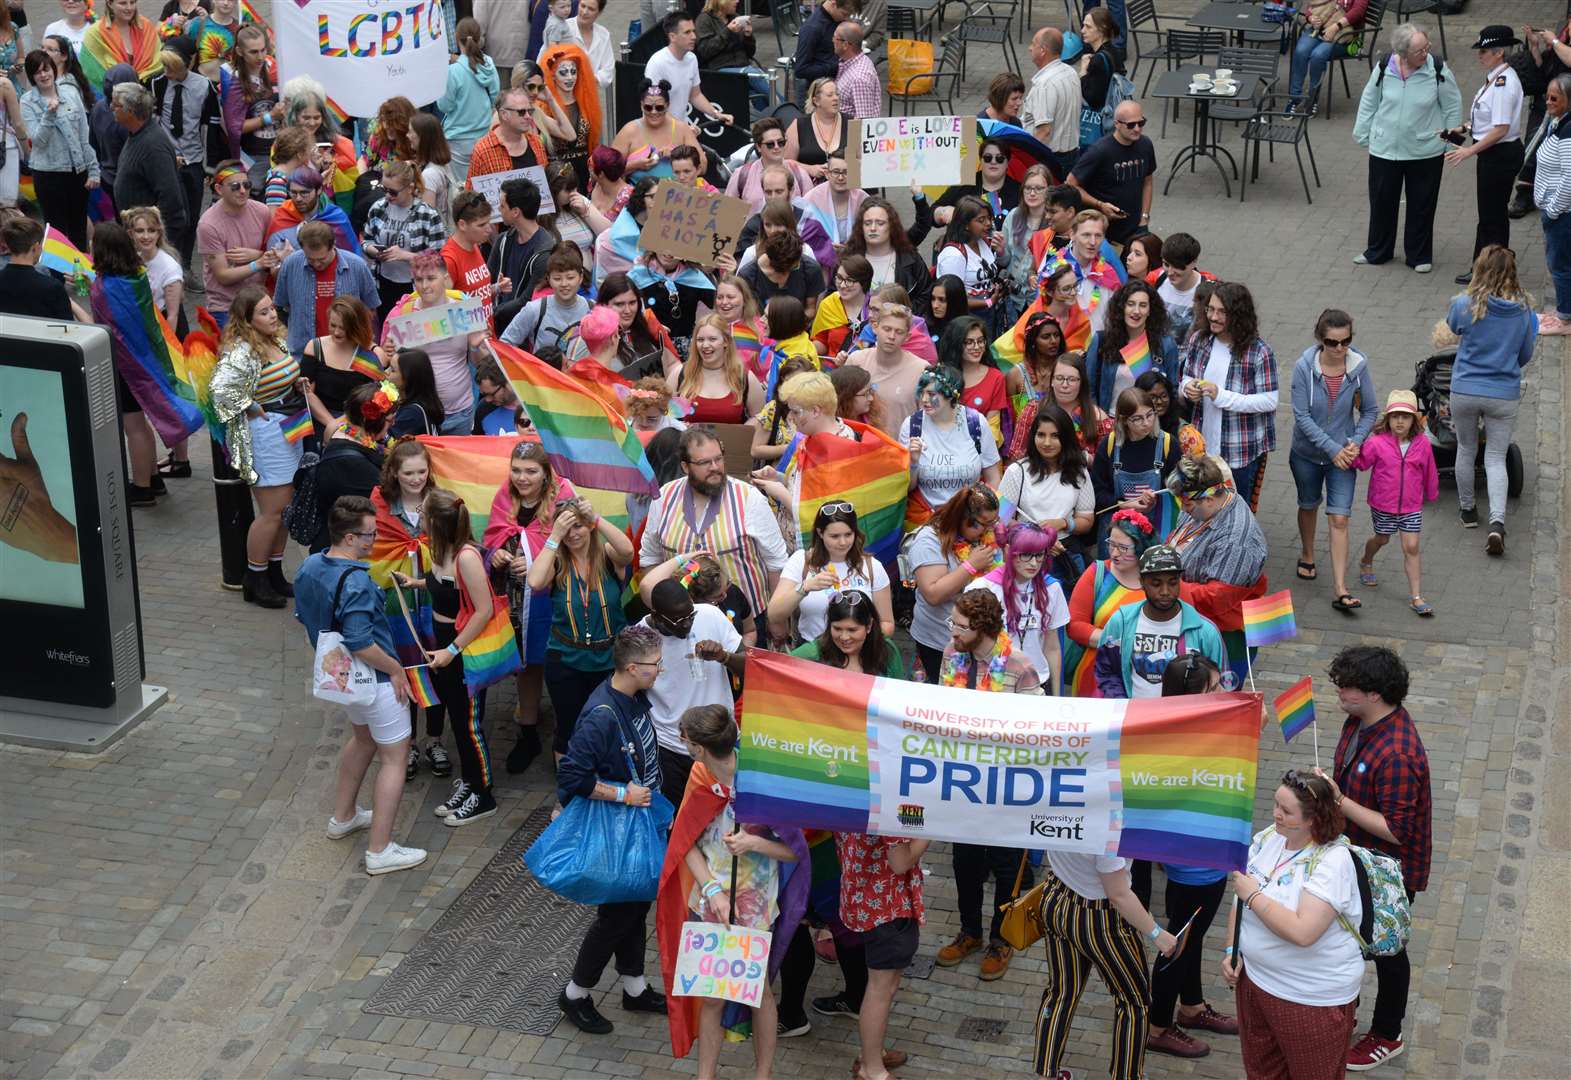 Canterbury Pride is taking place this Saturday